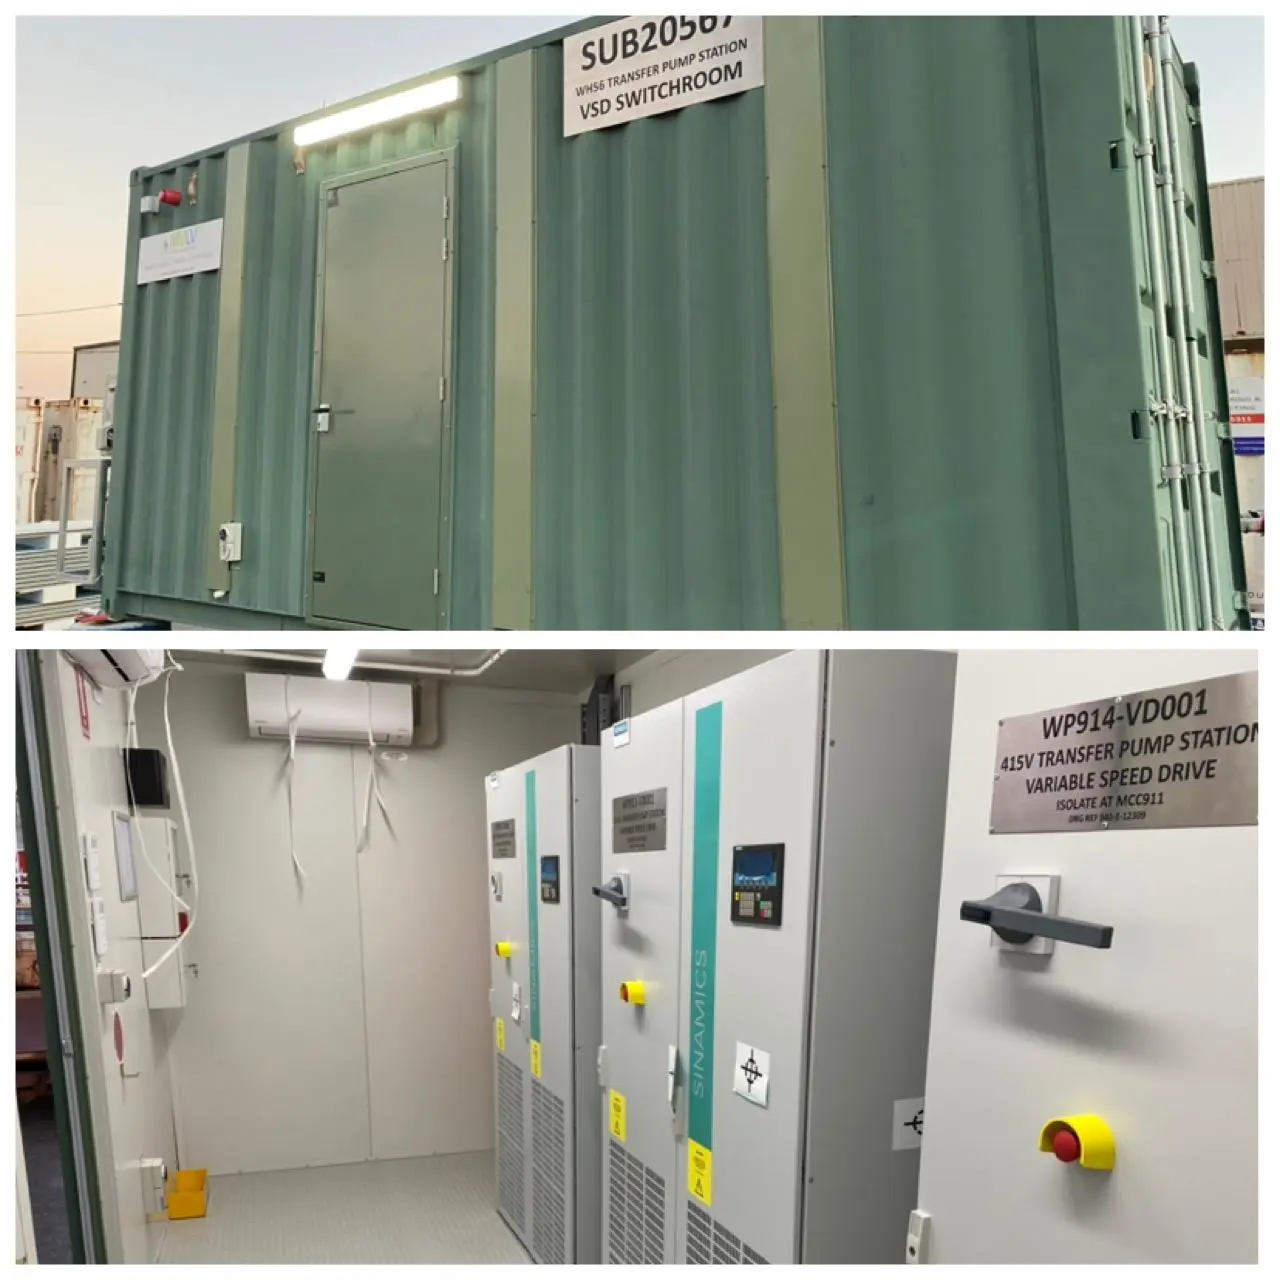 The Container Switchroom Completed just Before Christmas for One of Our Customers